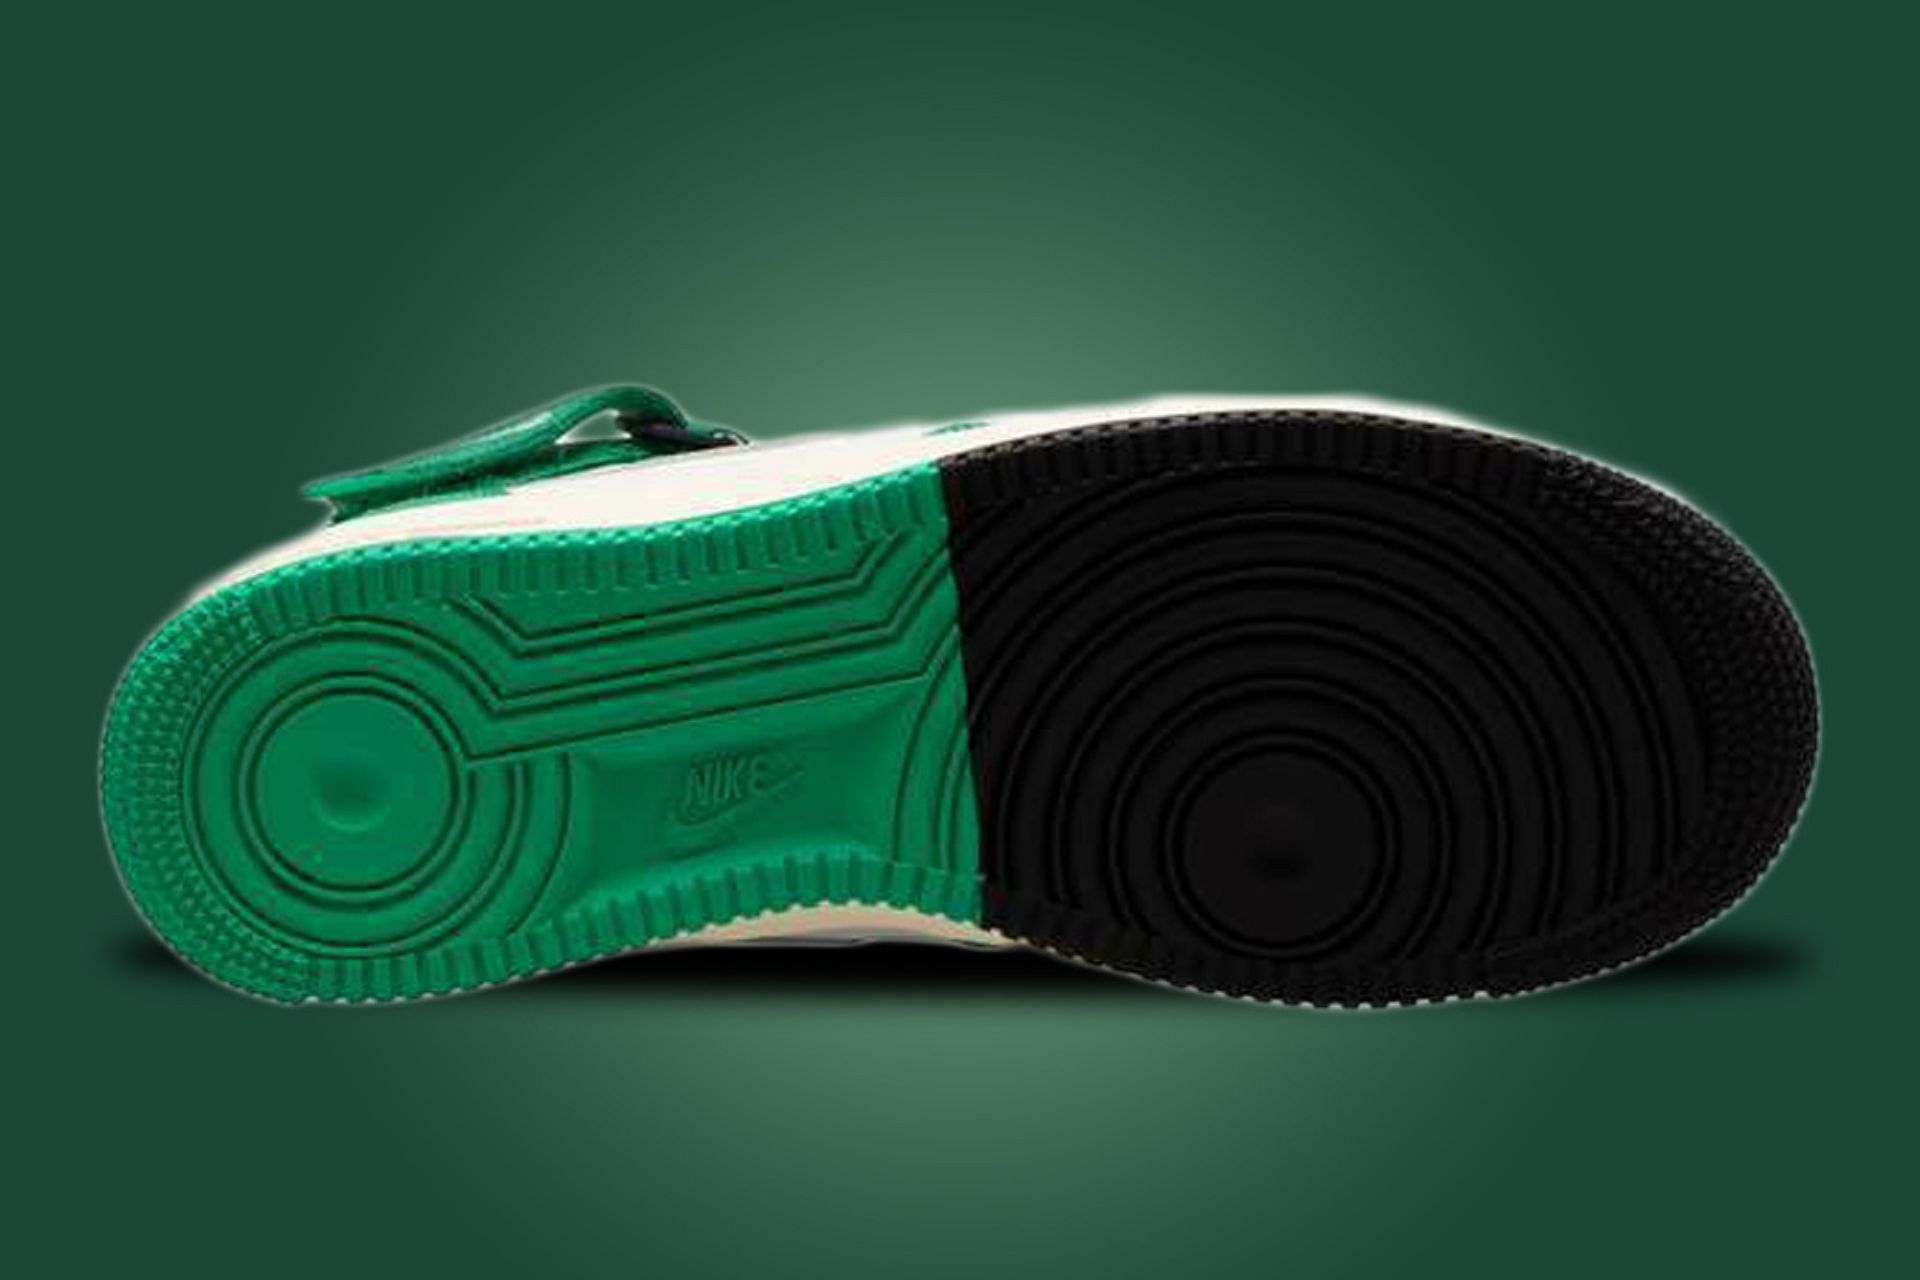 The outsoles of these sneakers are also completed in matching split patterns (Image via Nike)